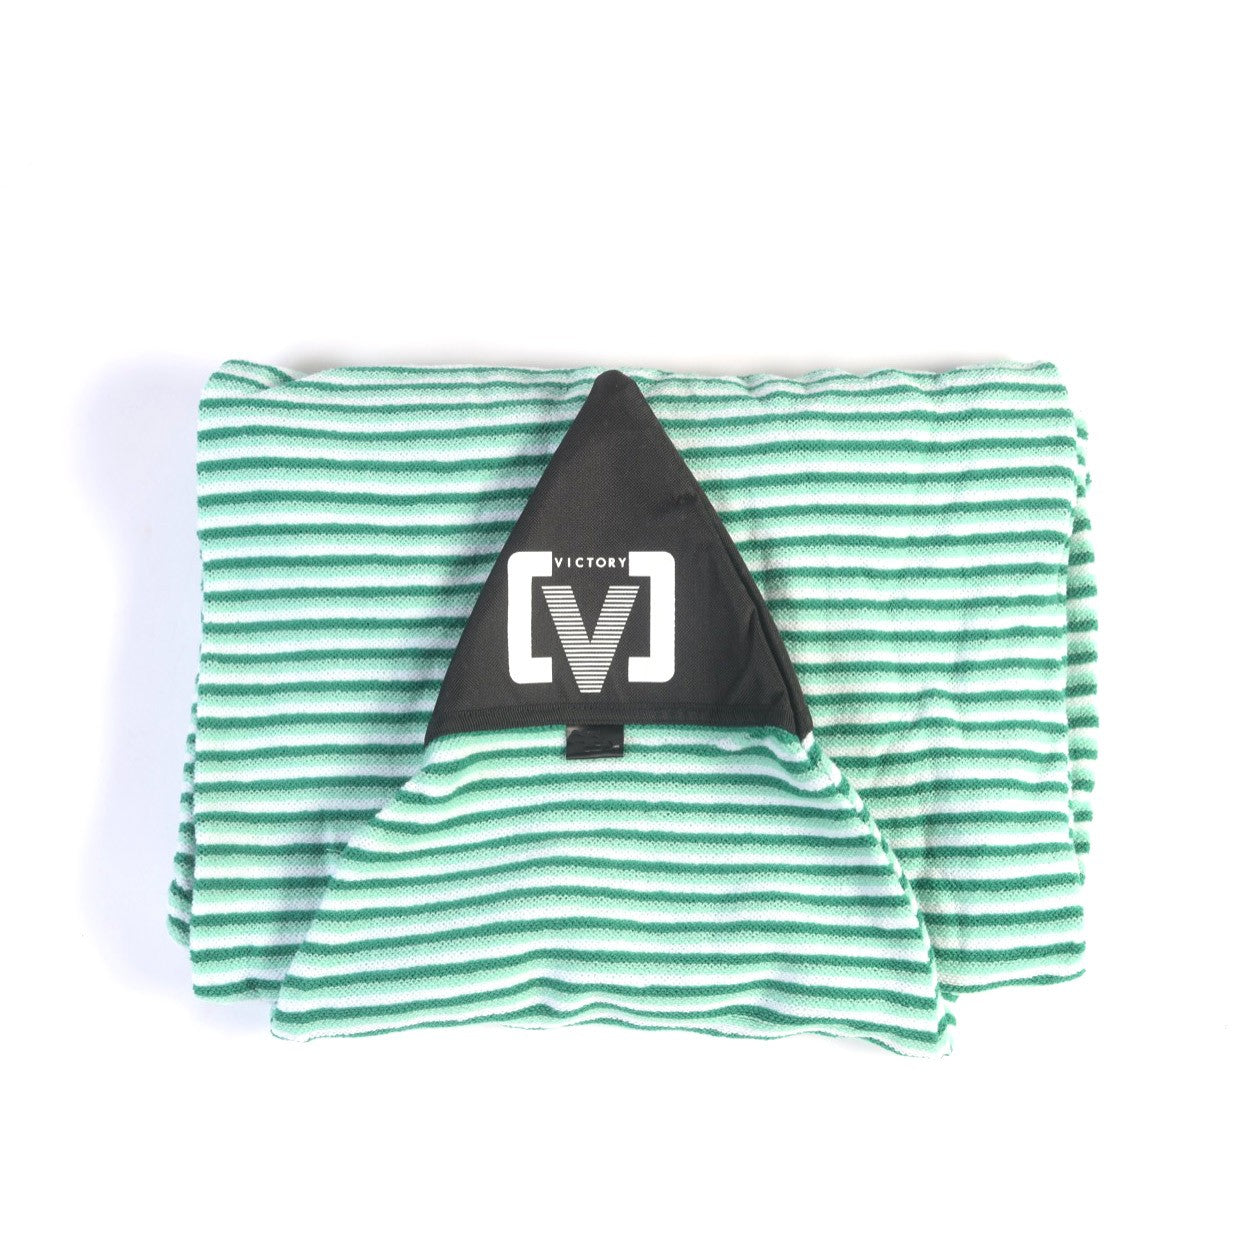 VICTORY - Surf Sock Cover - Shortboard - 6'6 - Green / White